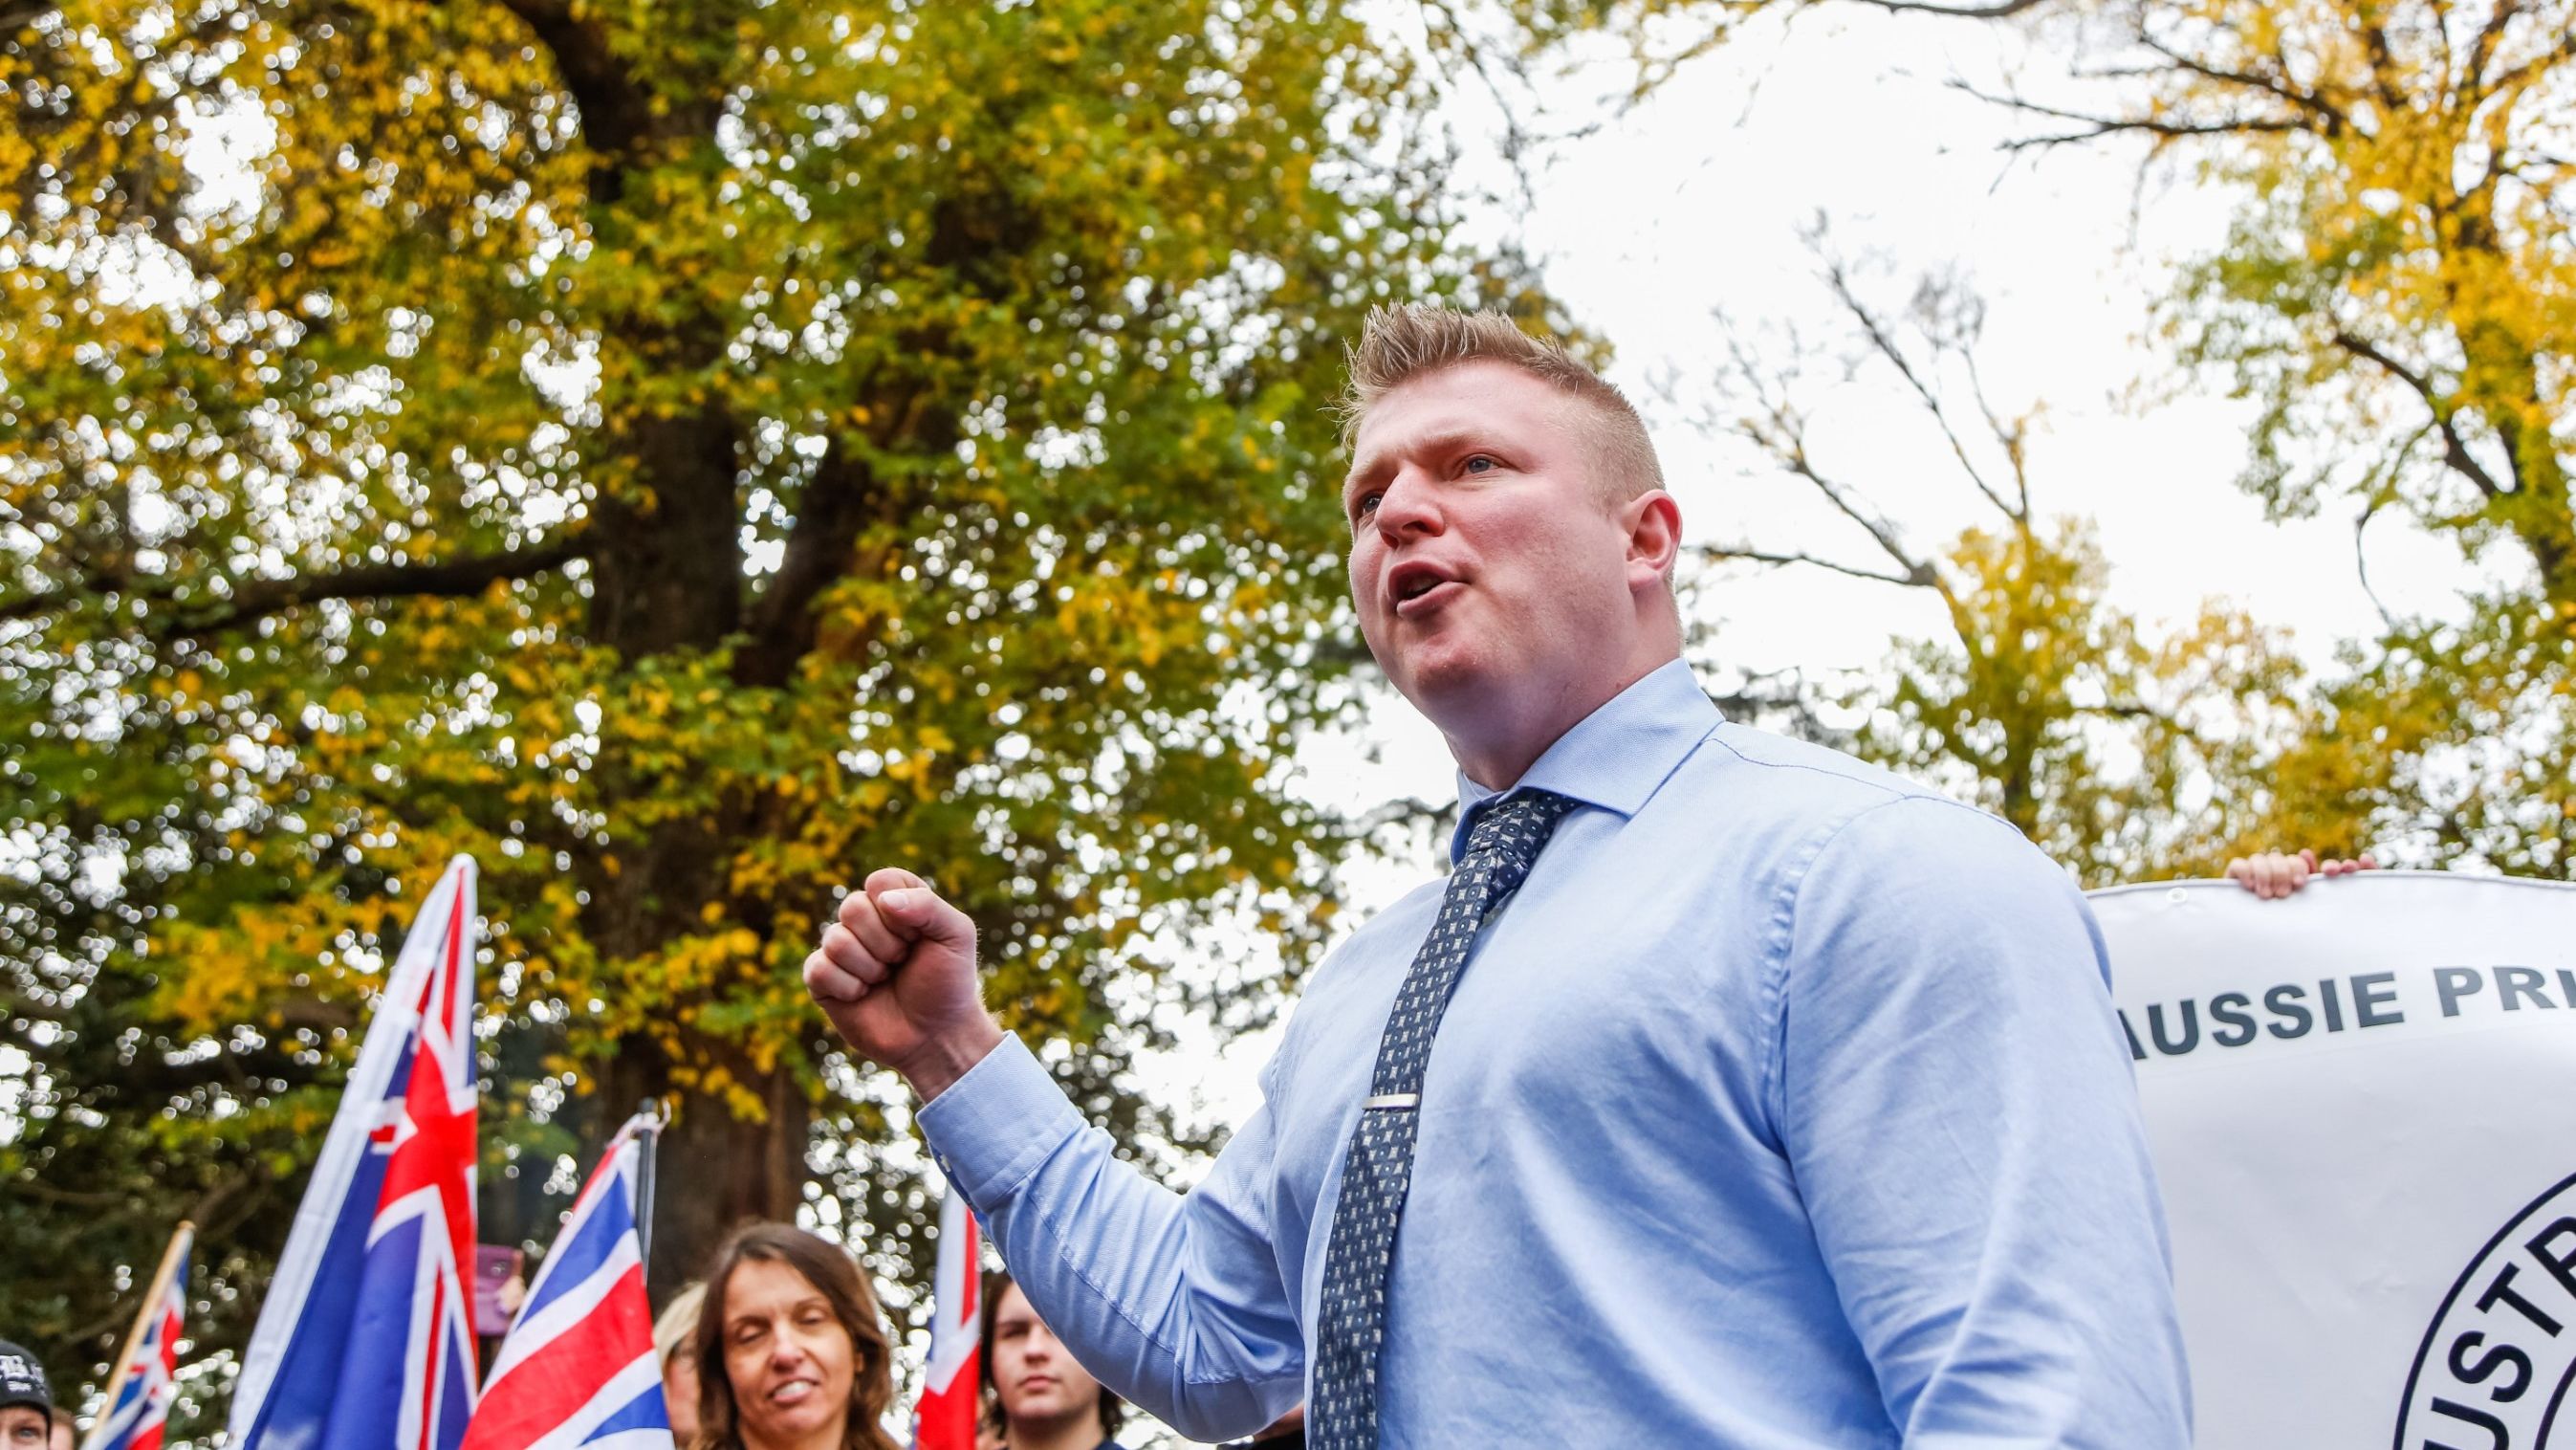 United Patriots Front leader Blair Cottrell speaks during a protest organized by the anti-Islam True Blue Crew in Melbourne, Australia on June 25, 2017. 